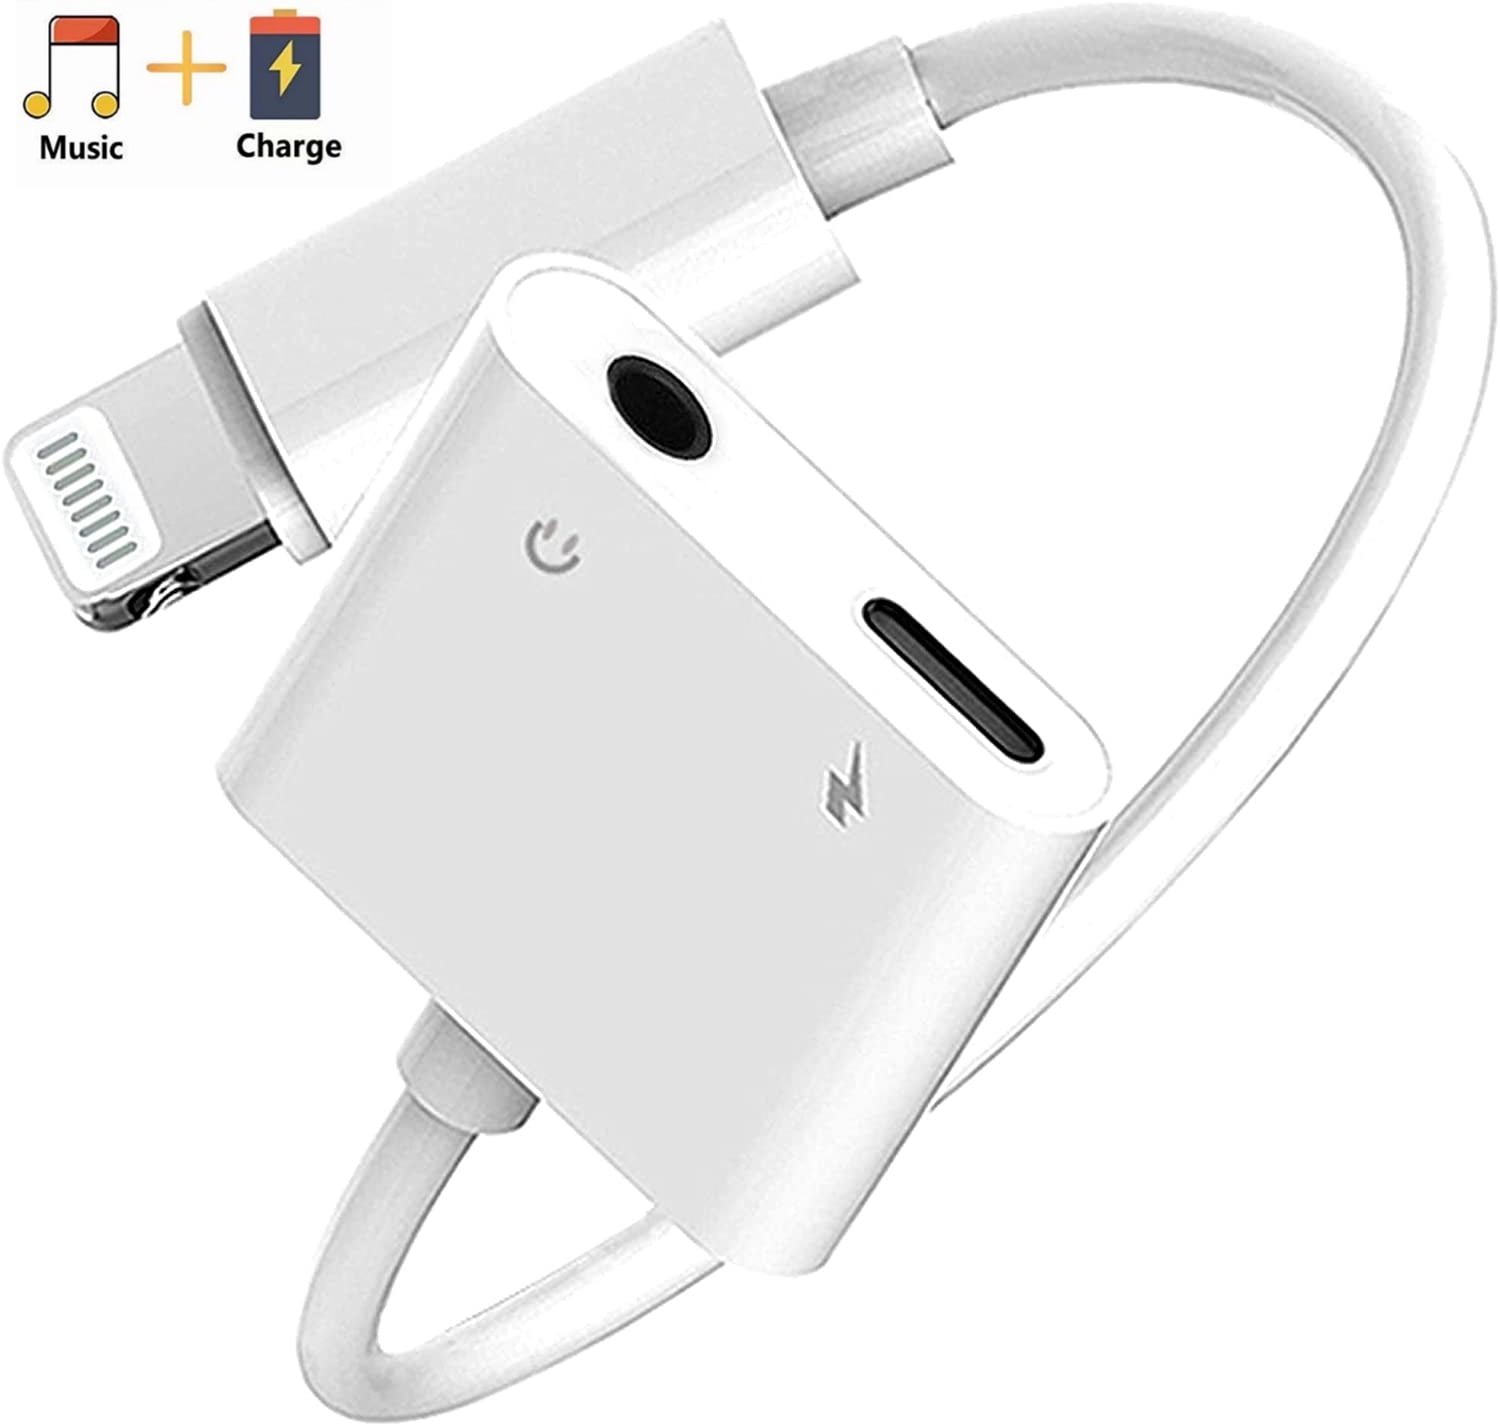 【3Pack】 3.5mm Headphone Adapter Earbuds Earphones Adapter 3Pack,Dongle for iPhone X/Xs/Xs Max/XR 7/8/8Plus iOS 10/11/12 Plug and Play Female Connector Audio Cable Earbuds Aux Converter White